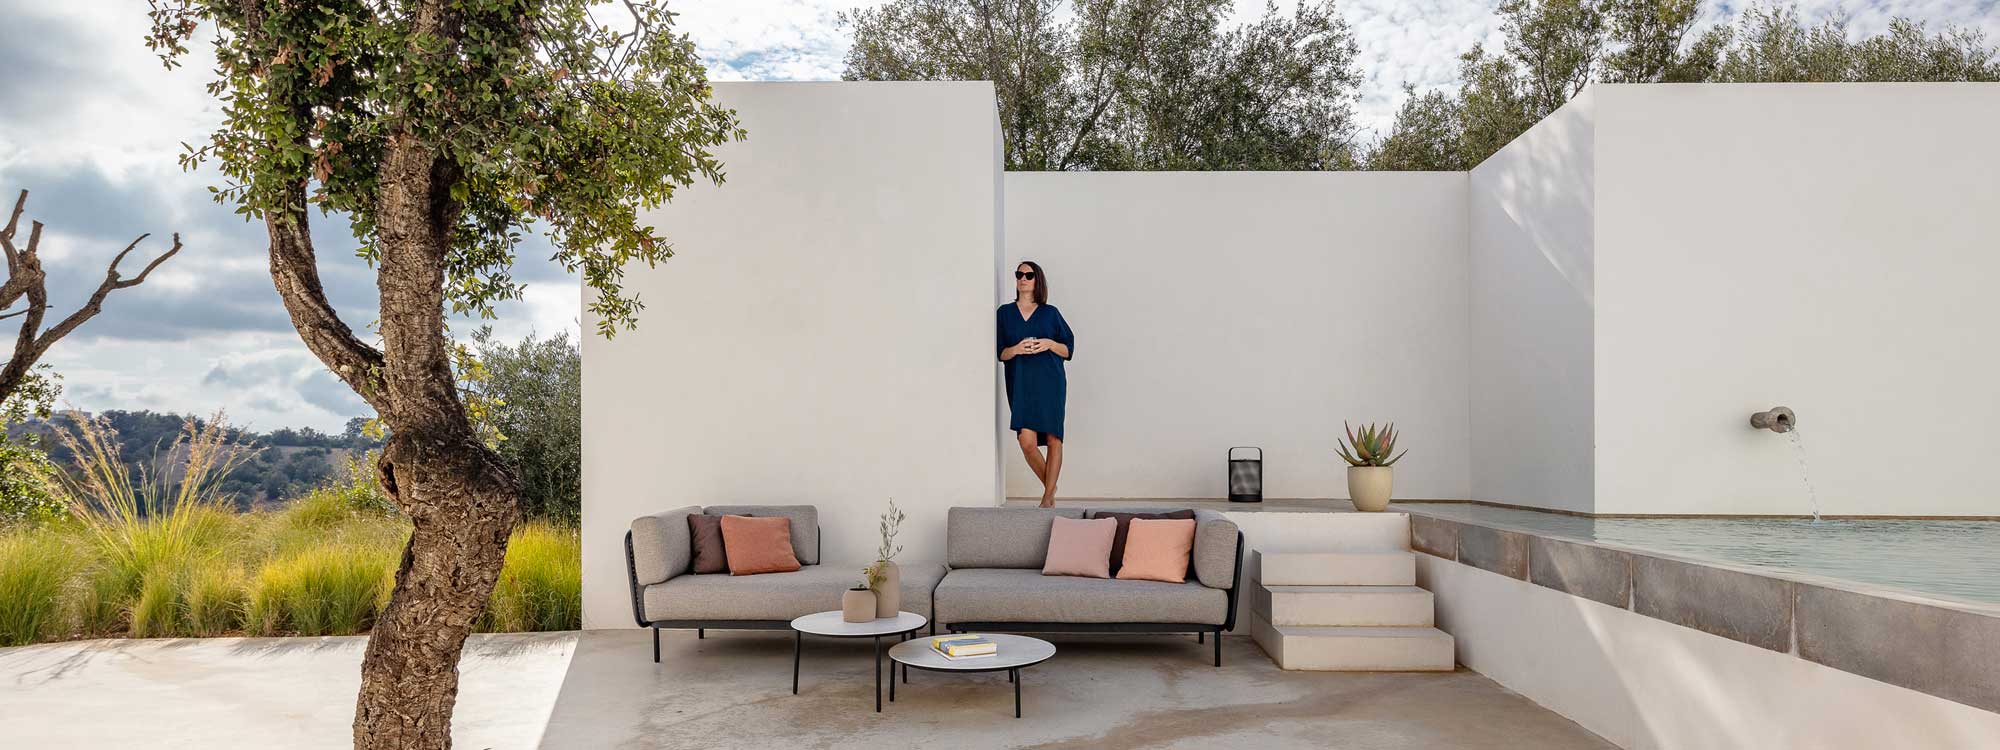 Baza modern outdoor sofa on Portuguese terrace between olive tree and swimming pool